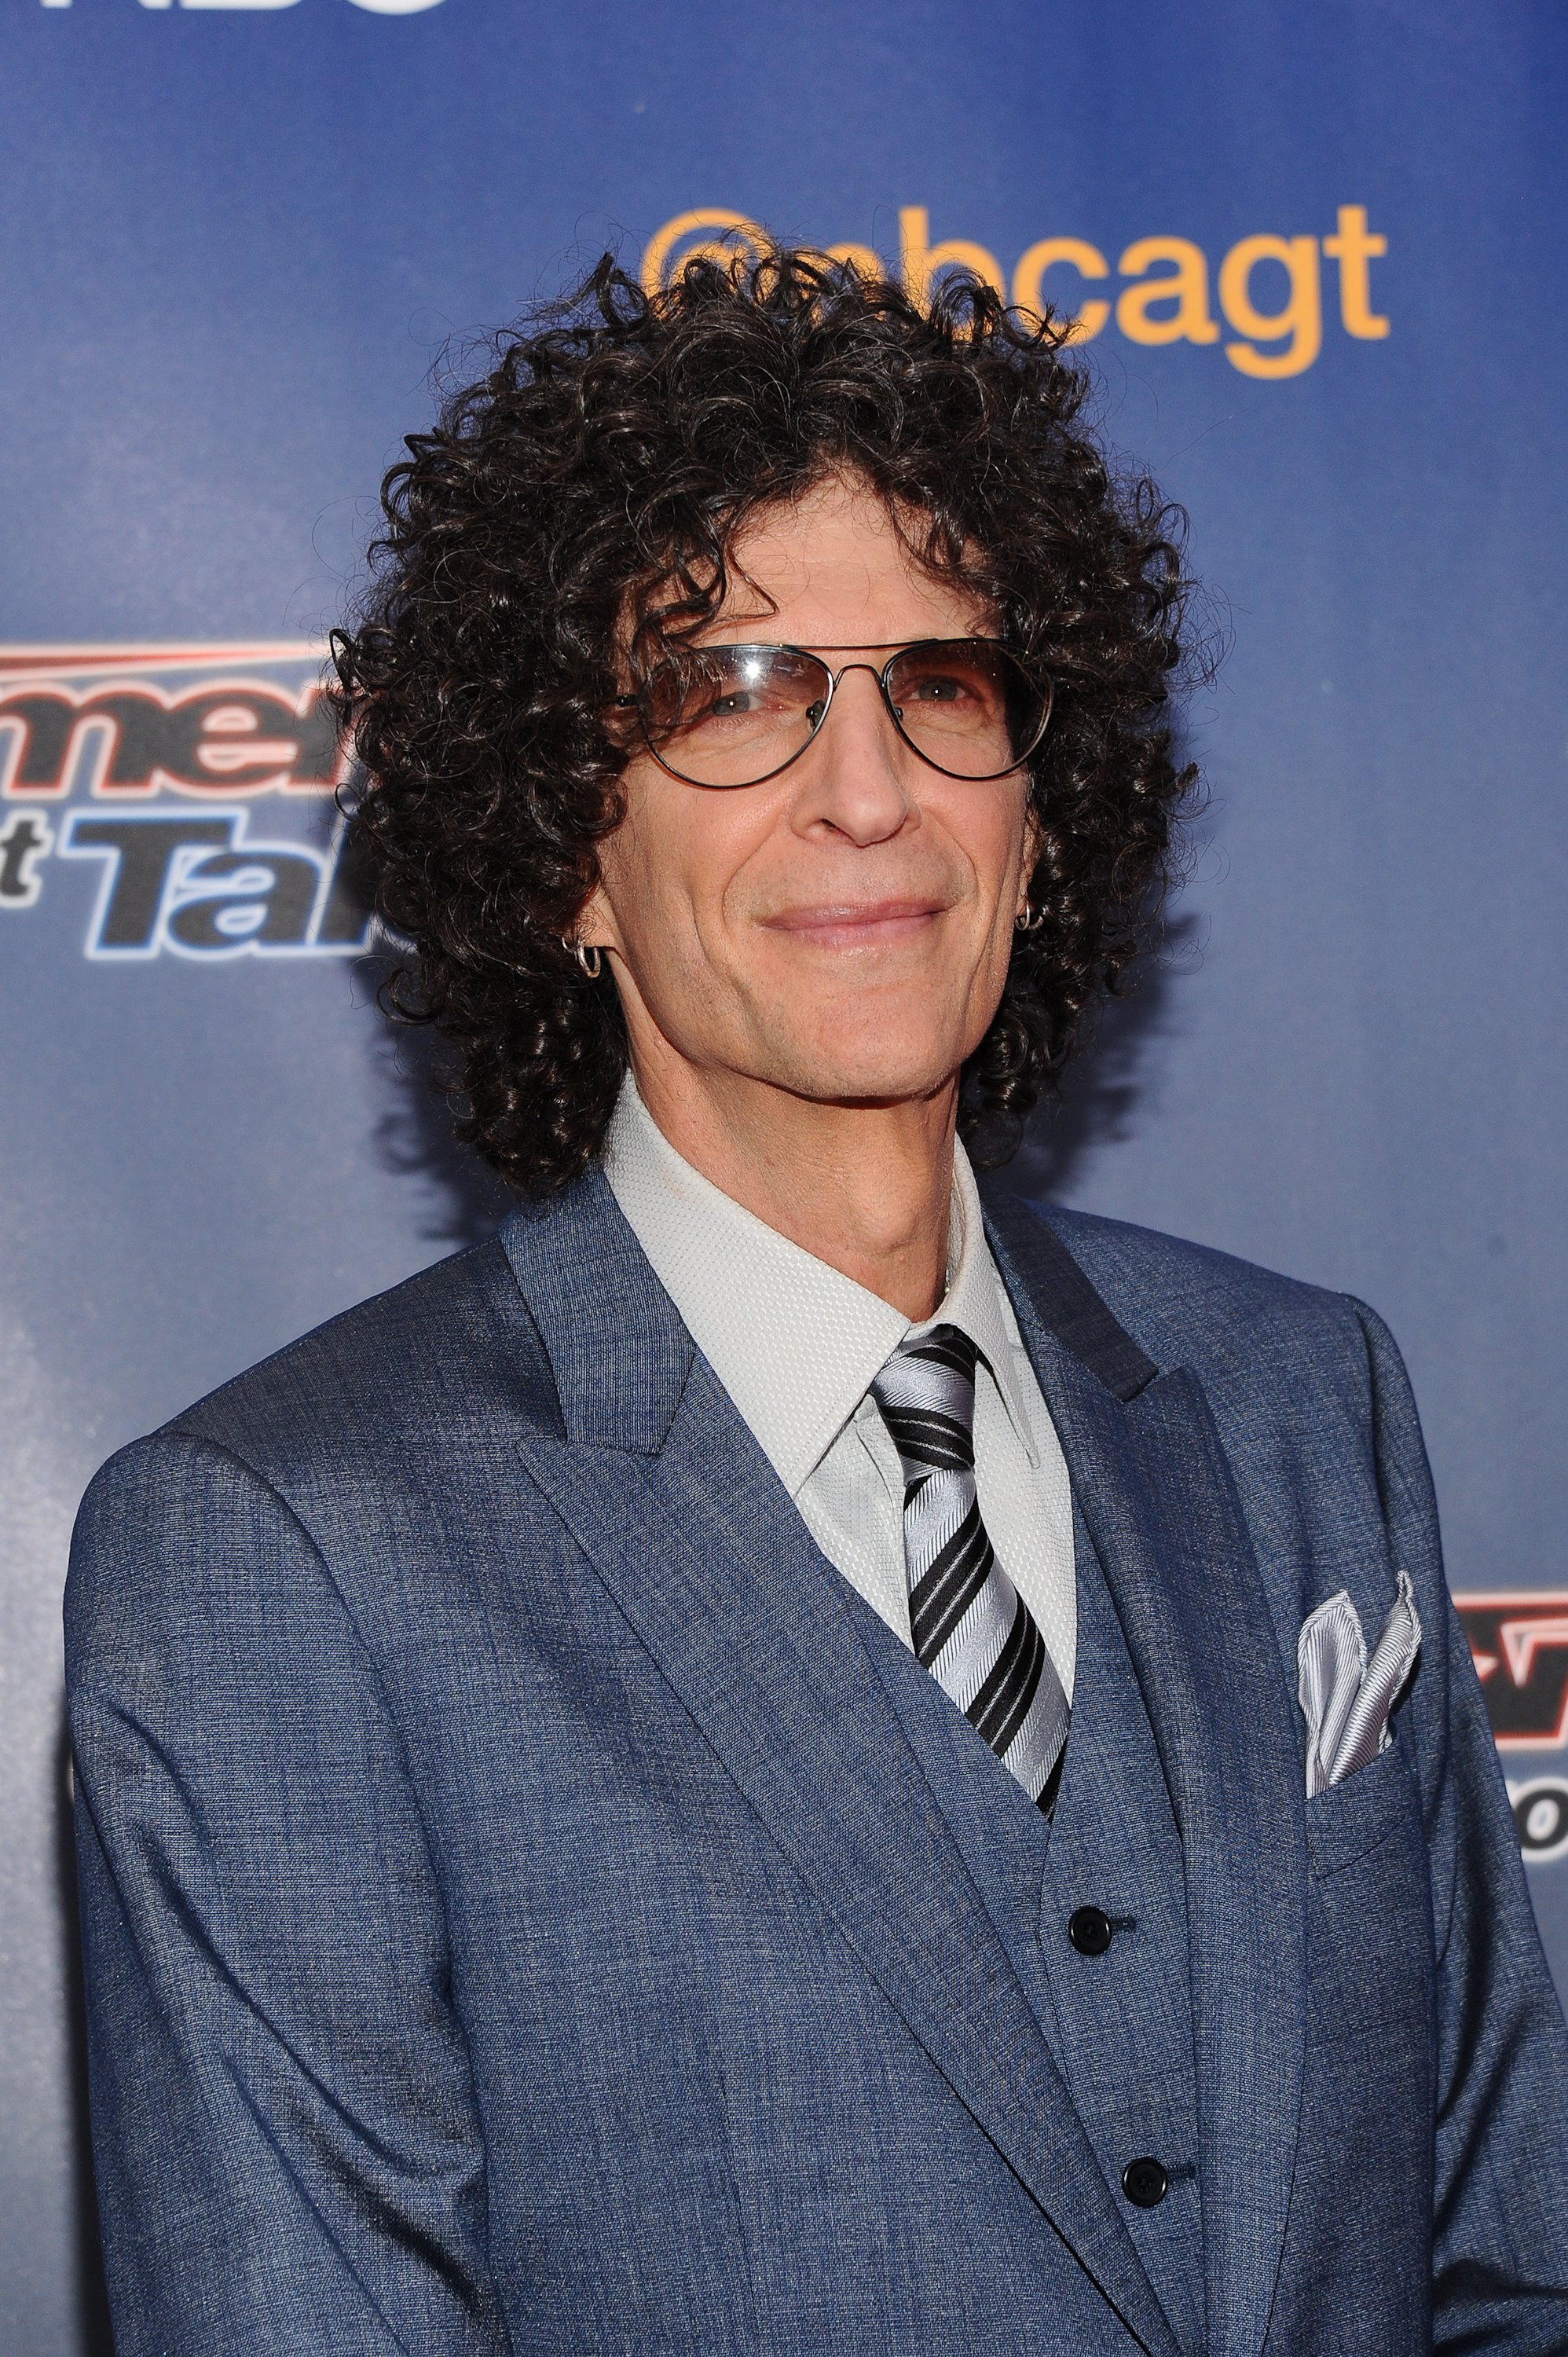 Howard Stern attends the "America's Got Talent" Season 9 Pre Show Red Carpet Event at Radio City Music Hall on July 29, 2014 | Photo: GettyImages